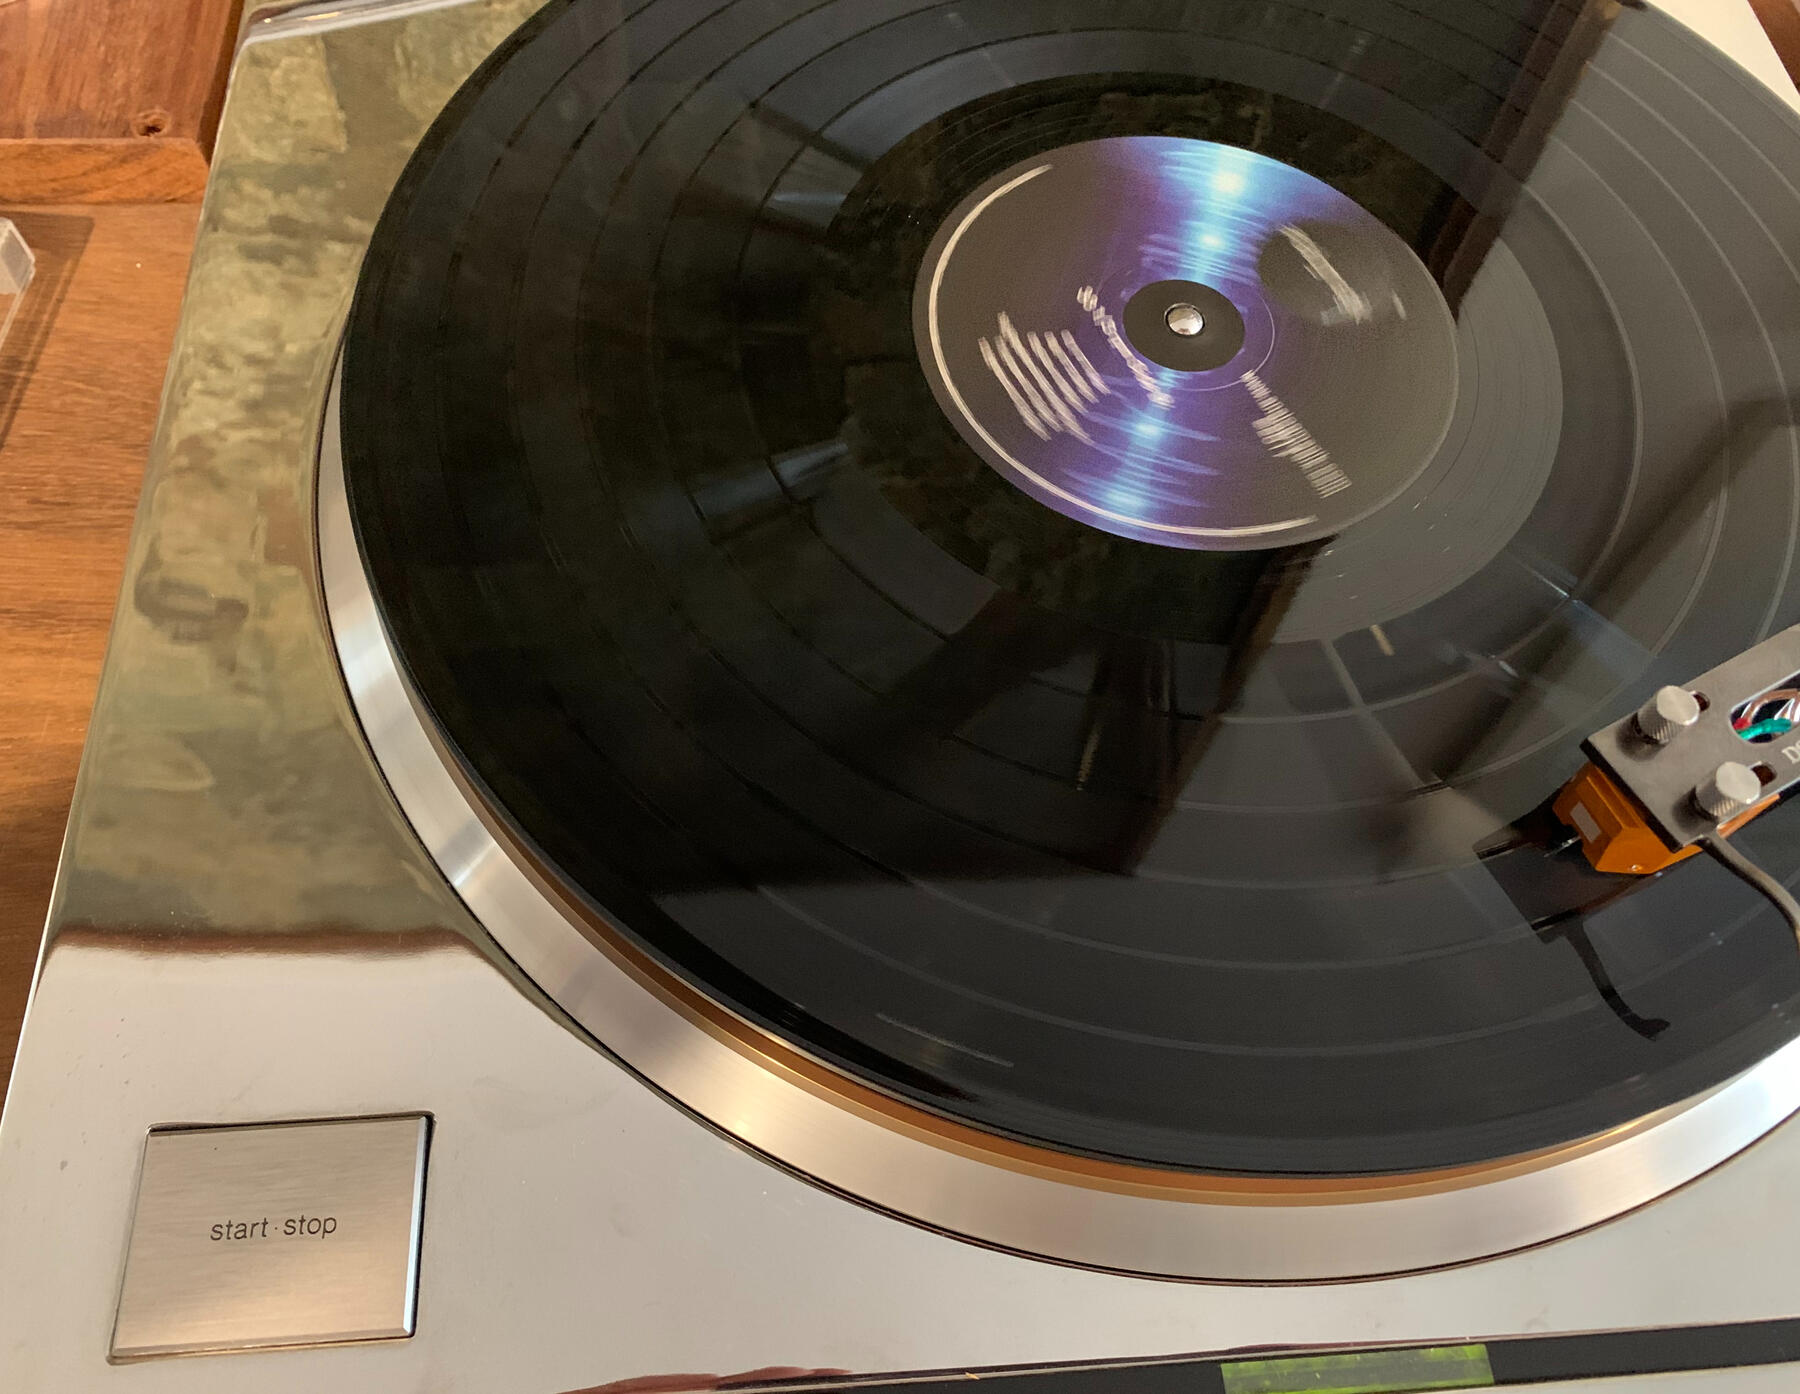 Image of vinyl record on a turntable.